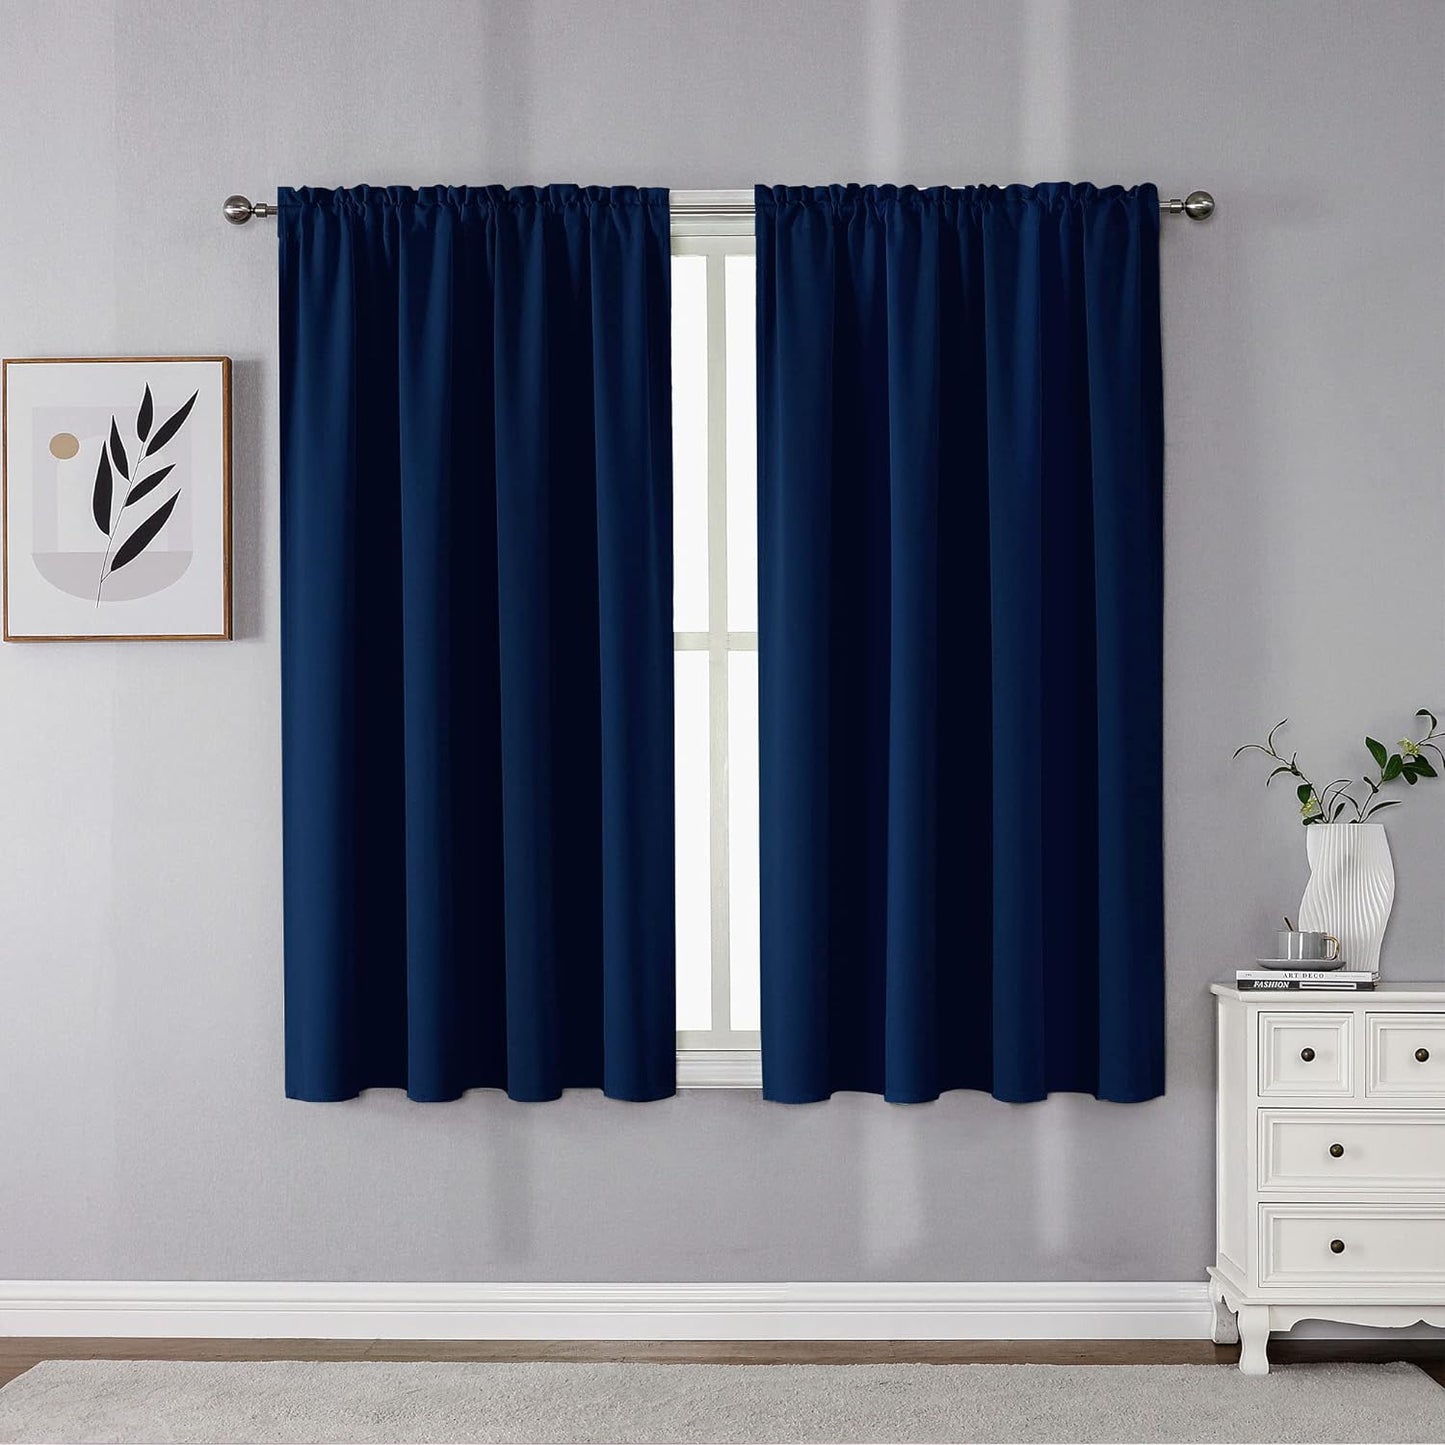 CUCRAF Blackout Curtains 84 Inches Long for Living Room, Light Beige Room Darkening Window Curtain Panels, Rod Pocket Thermal Insulated Solid Drapes for Bedroom, 52X84 Inch, Set of 2 Panels  CUCRAF Royal Blue 52W X 54L Inch 2 Panels 